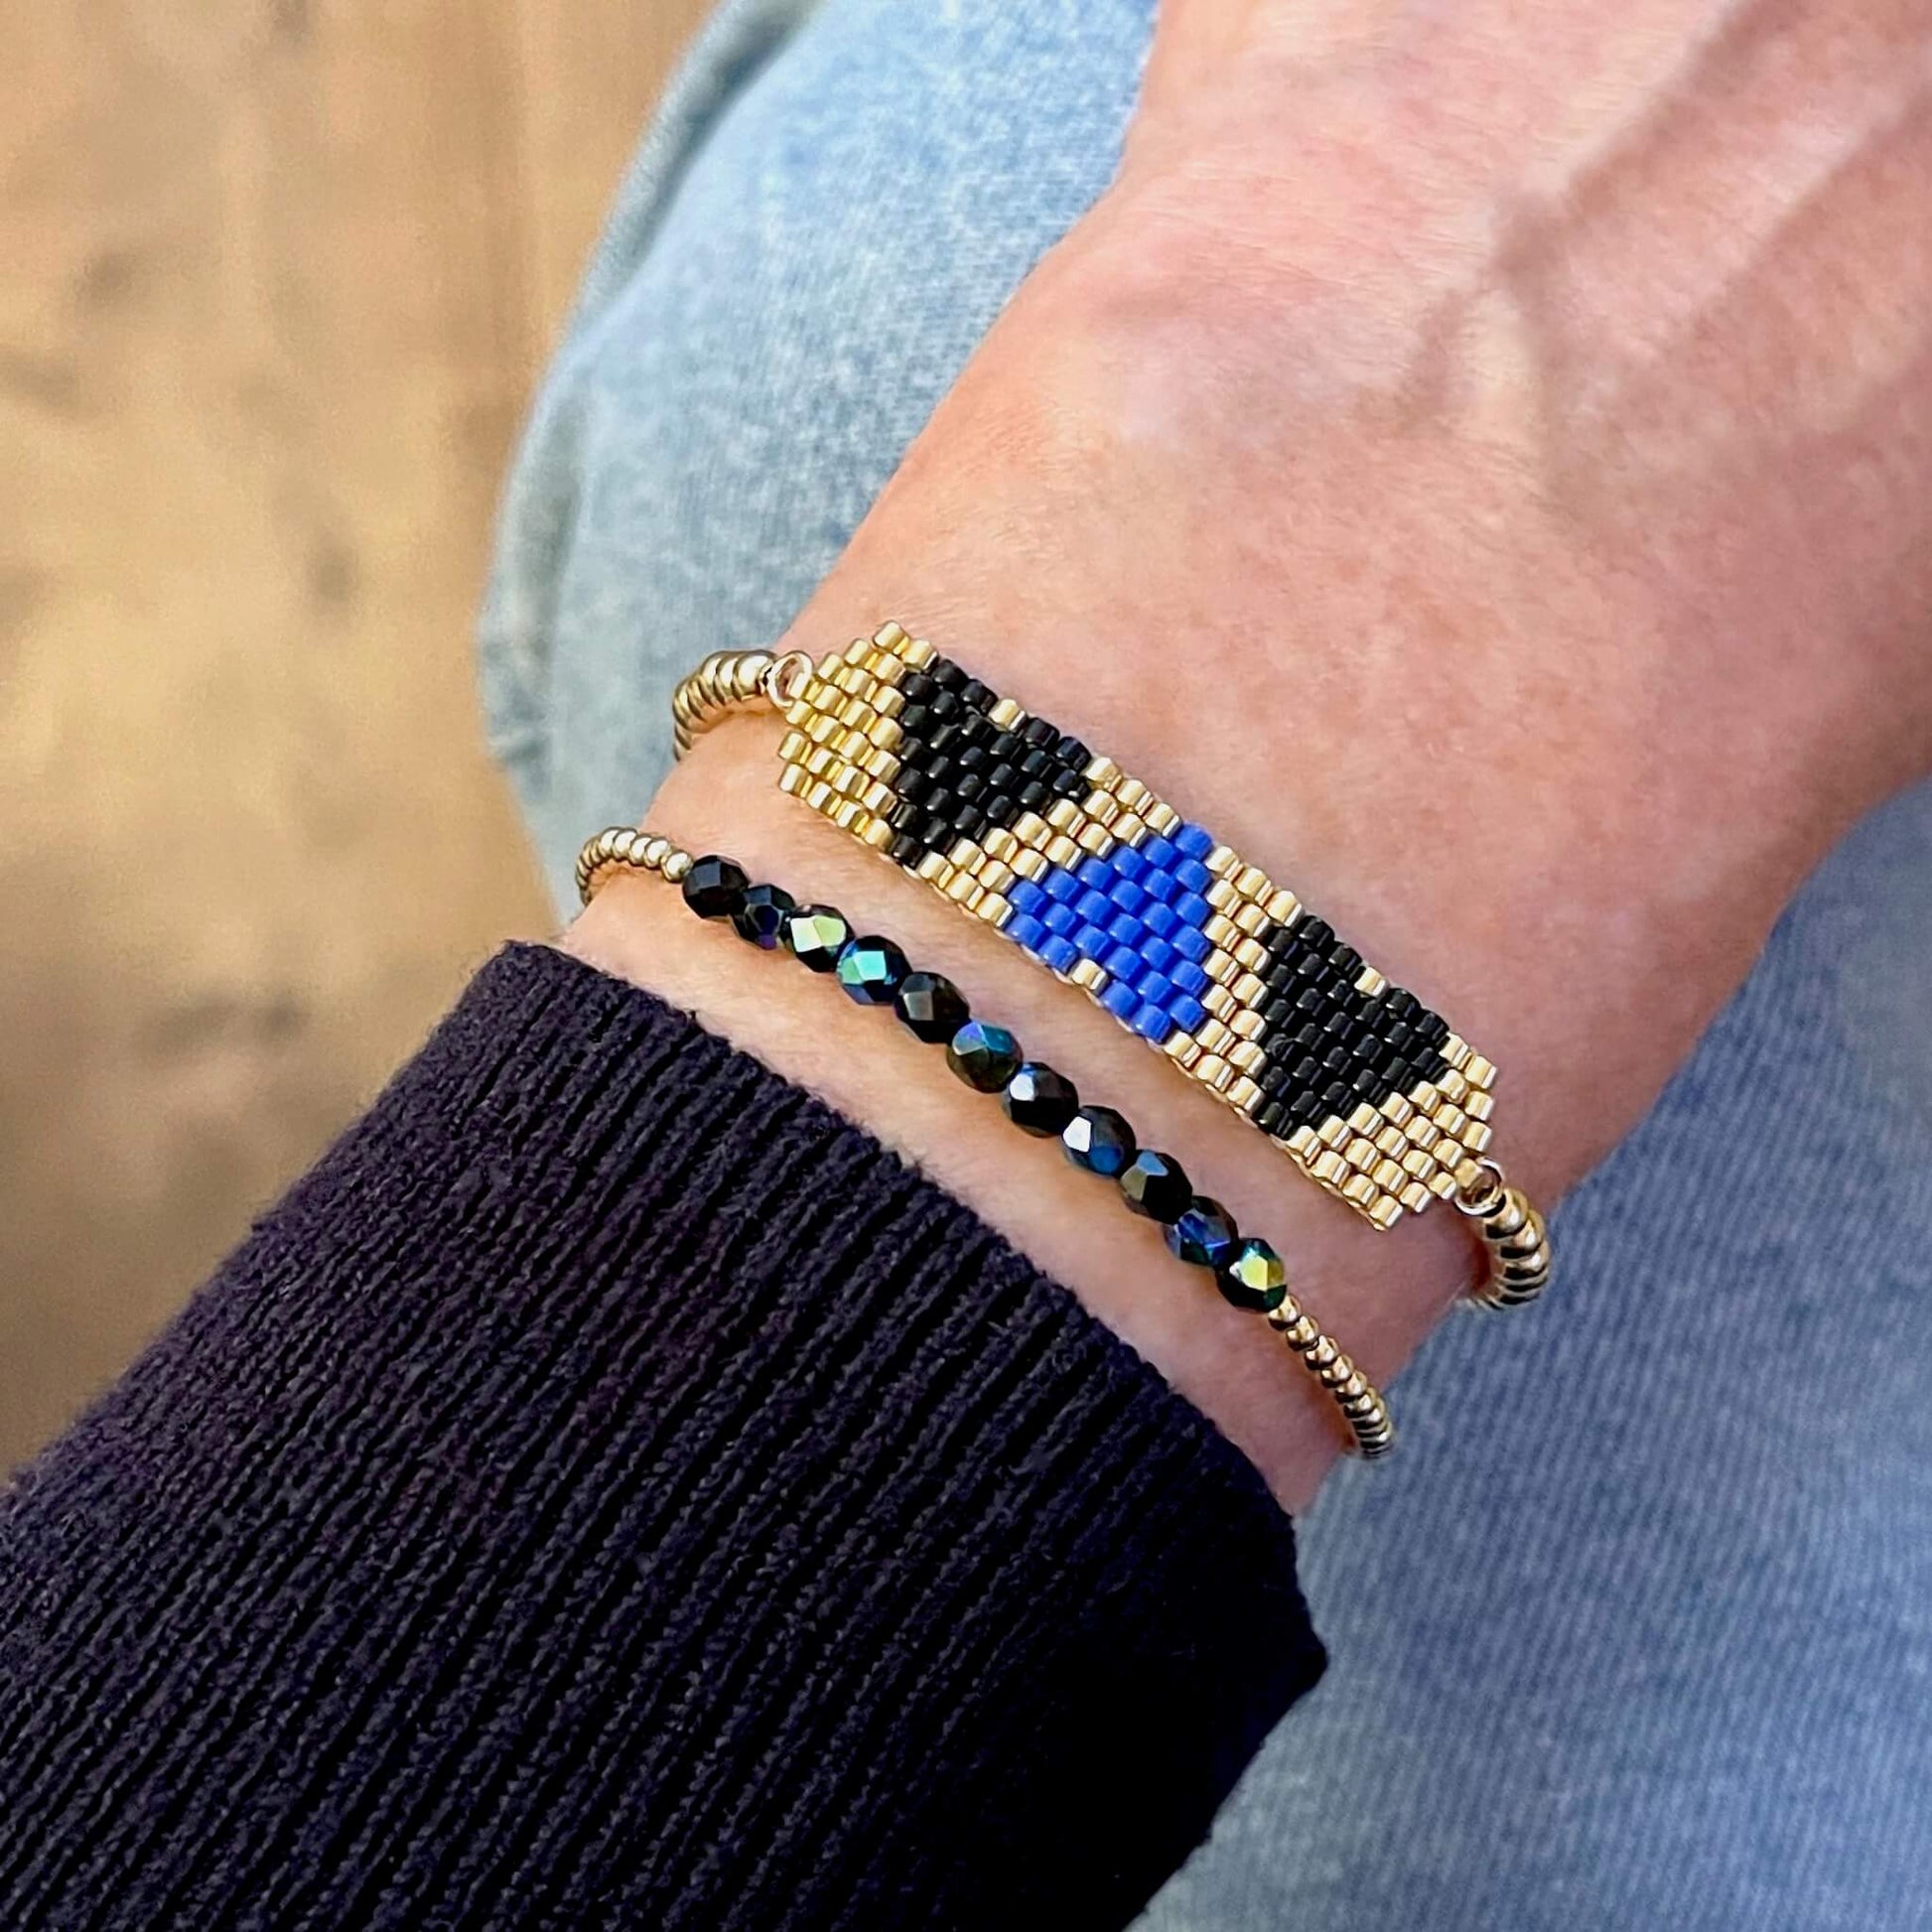 Heart beaded bracelet set with blue, black, and gold beads.